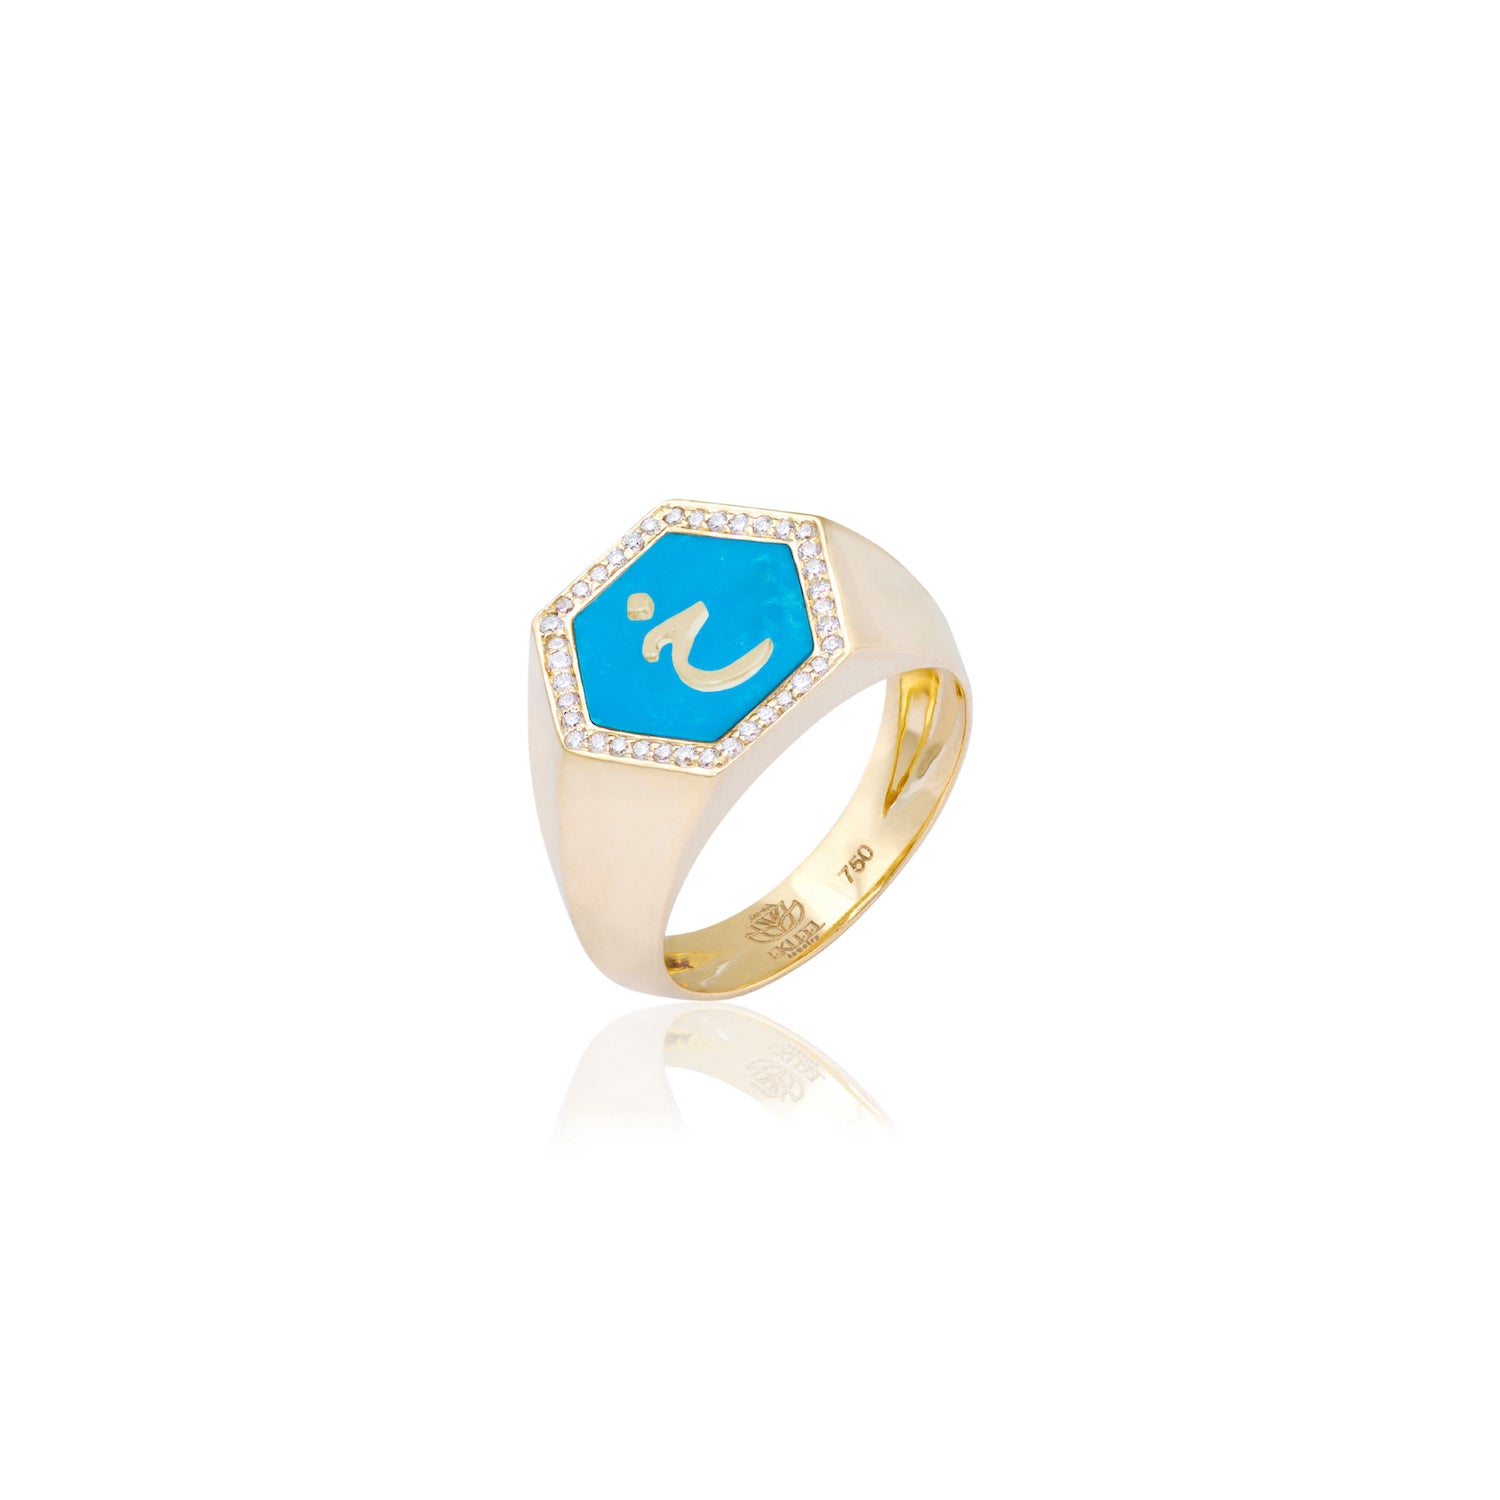 Qamoos 2.0 Letter خ Turquoise and Diamond Signet Ring in Yellow Gold